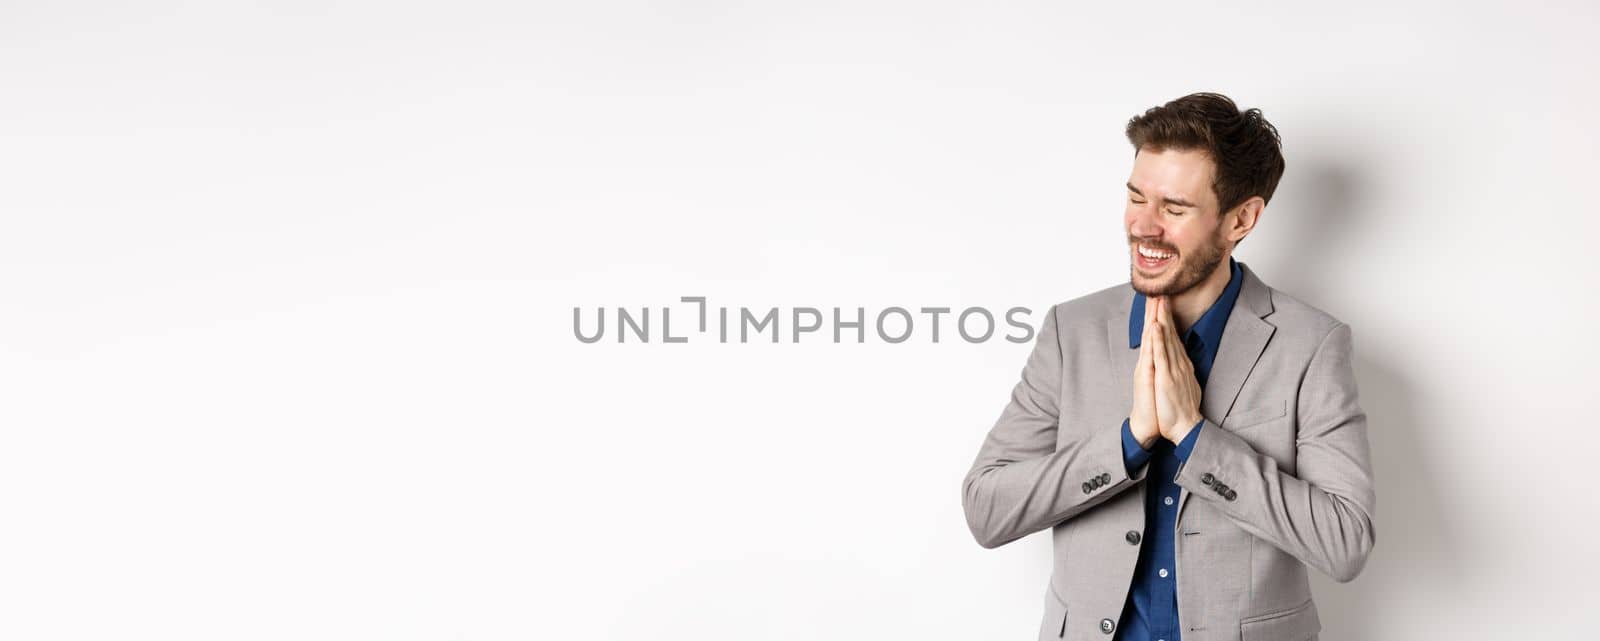 Happy and thankful businessman rejoicing, holding hands in begging or namaste sign, thanking for help, smiling relieved, standing in suit on white background.